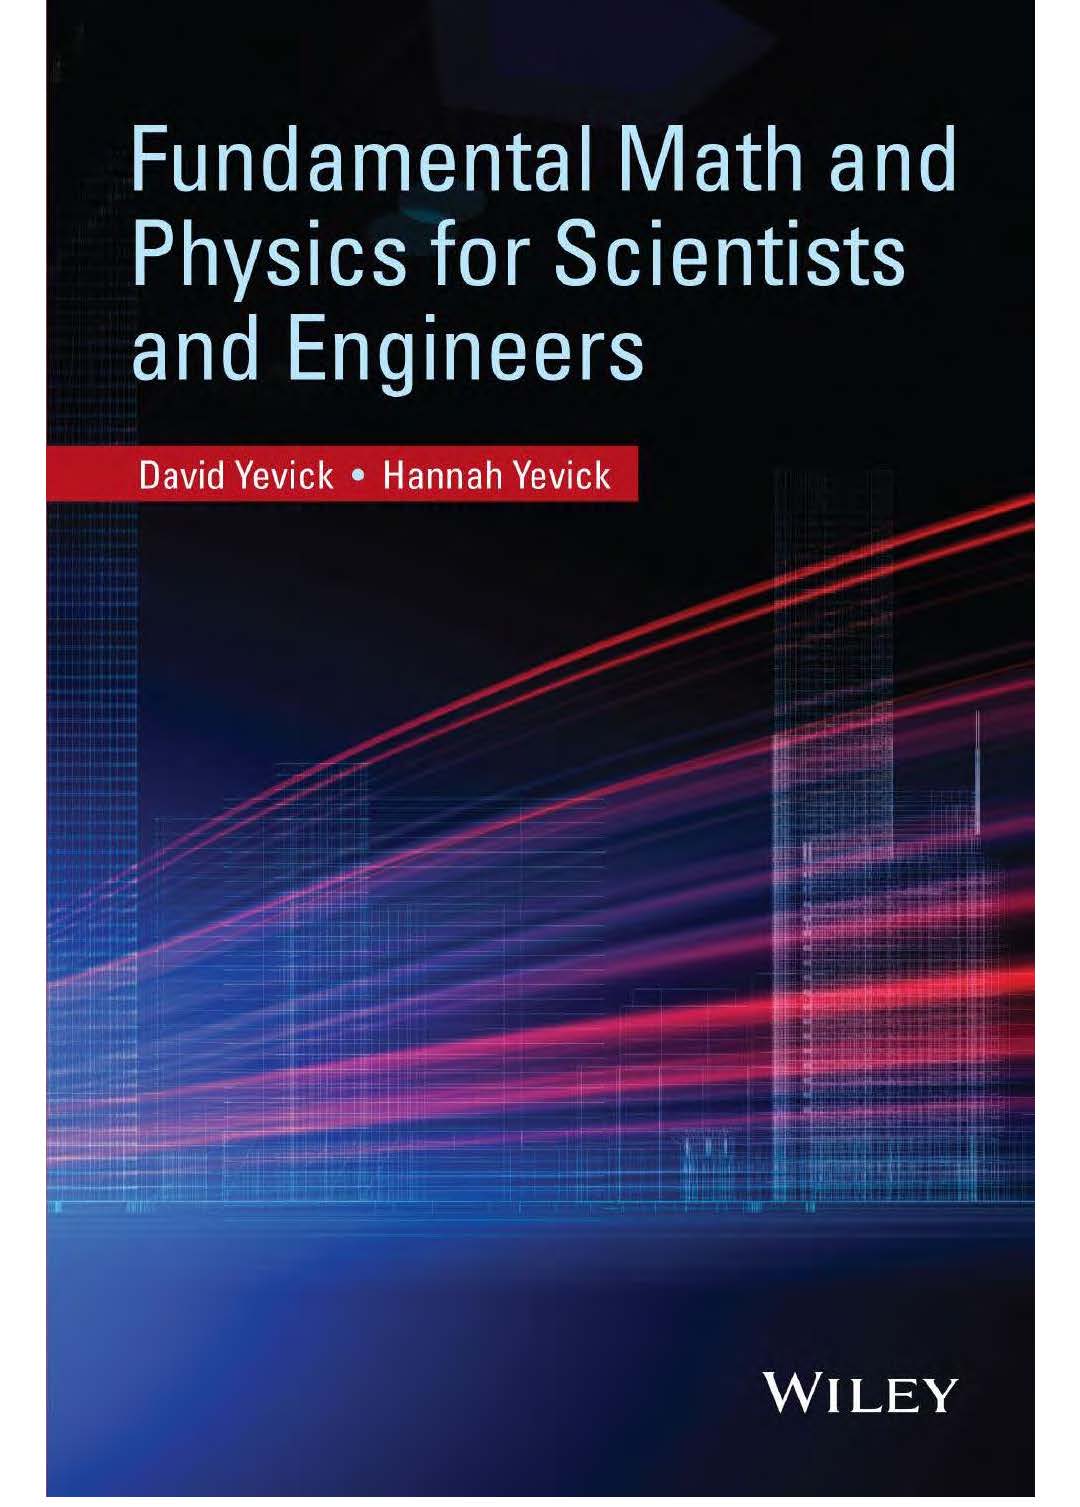 physics for scientists and engineers knight ebook free download